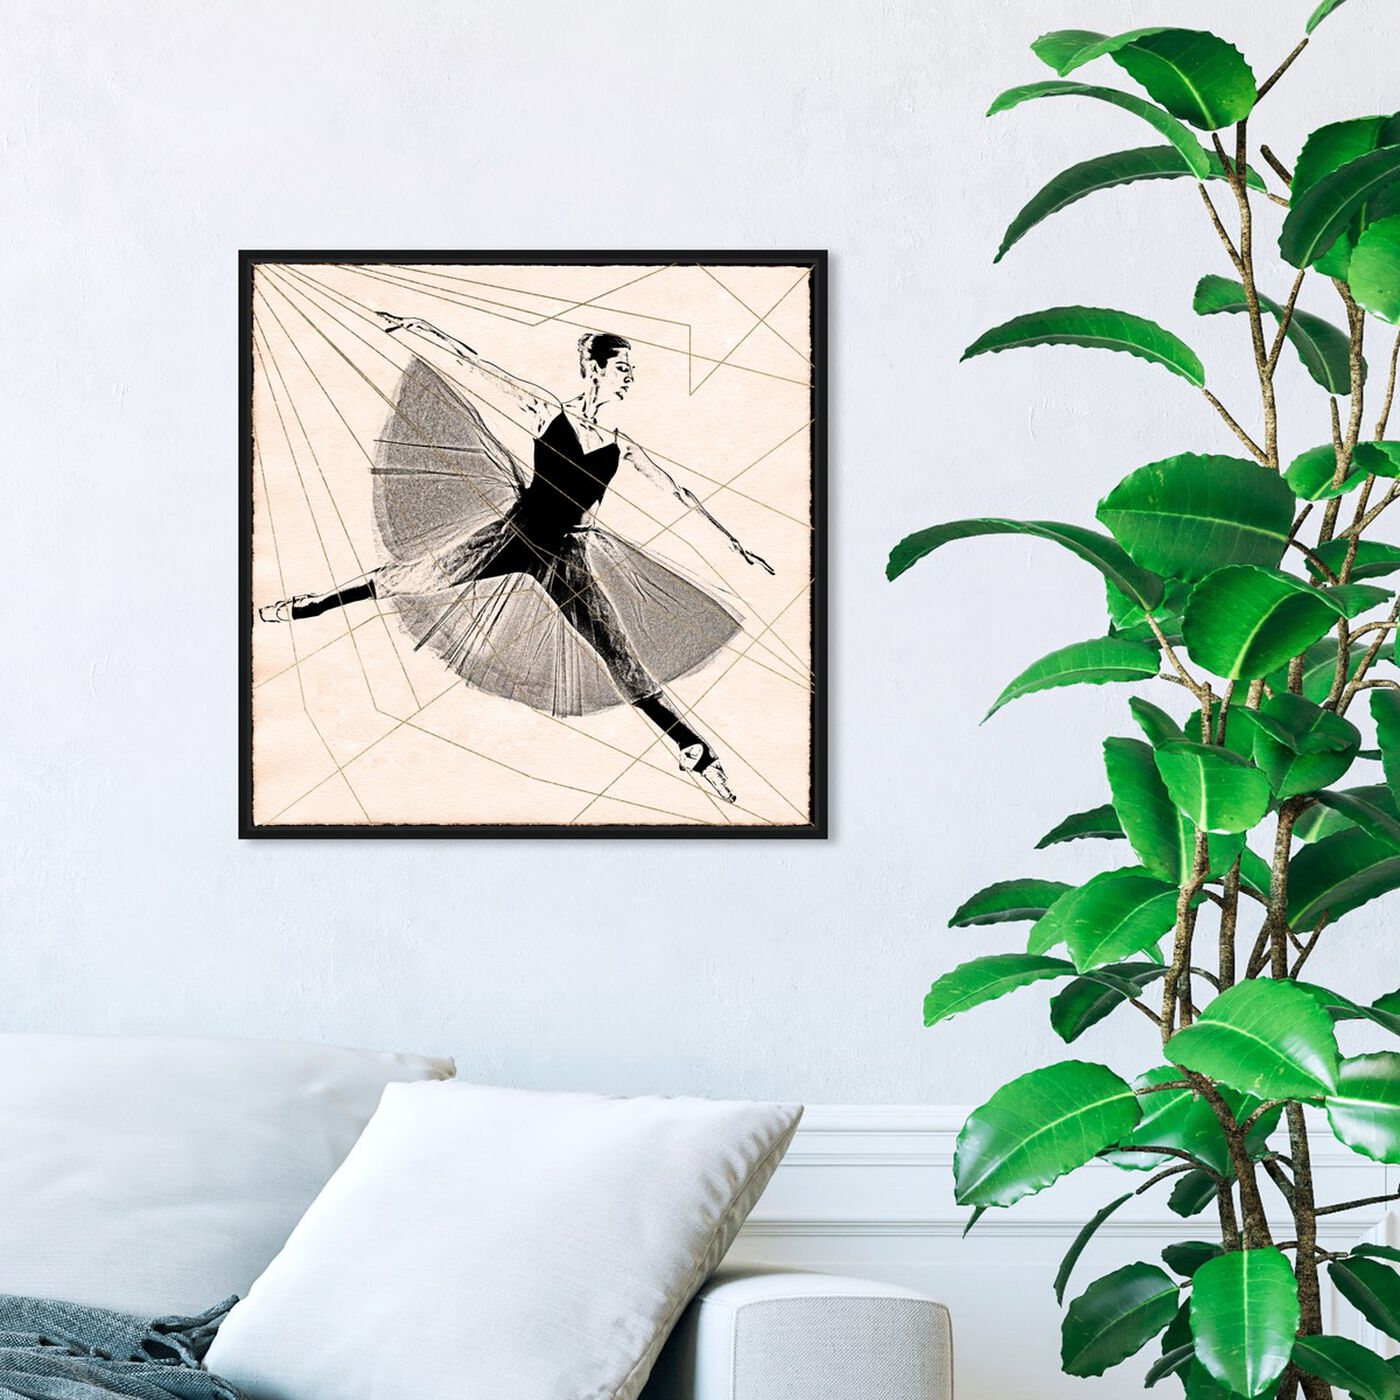 Hanging view of Ballet I Print featuring sports and teams and ballet art.